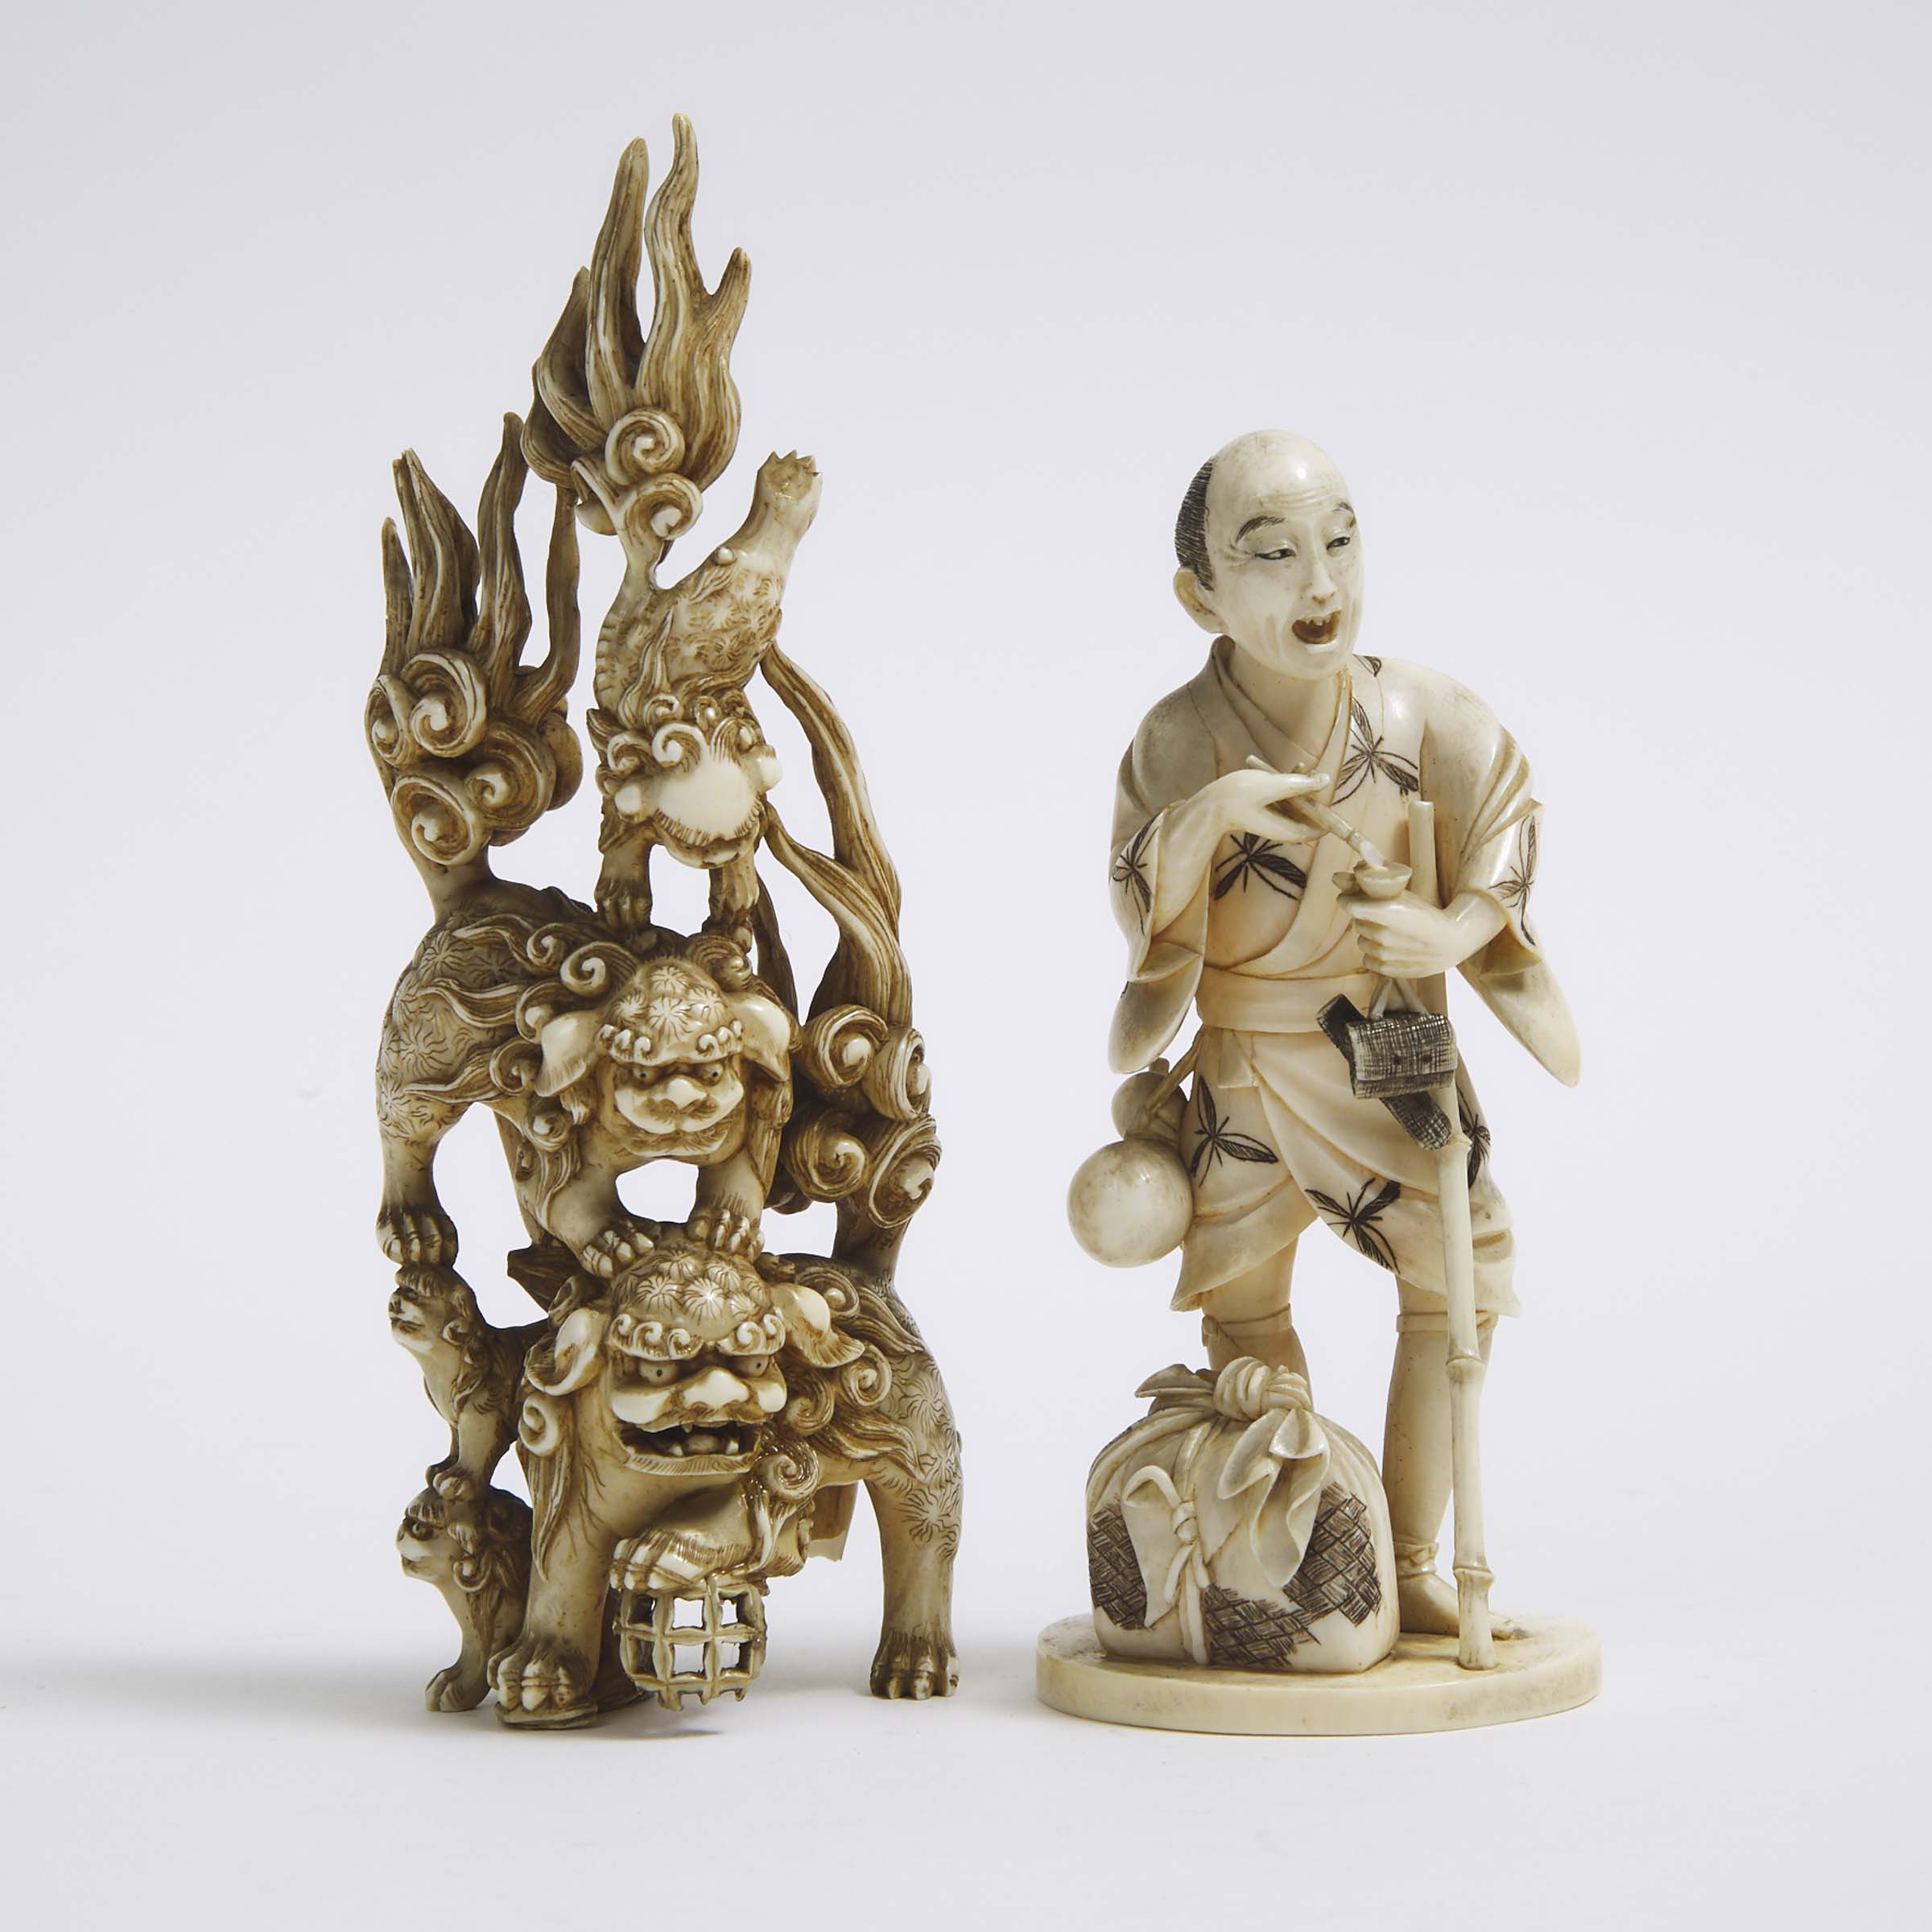 Two Ivory Okimono of Shishis and a Standing Man, Meiji Period